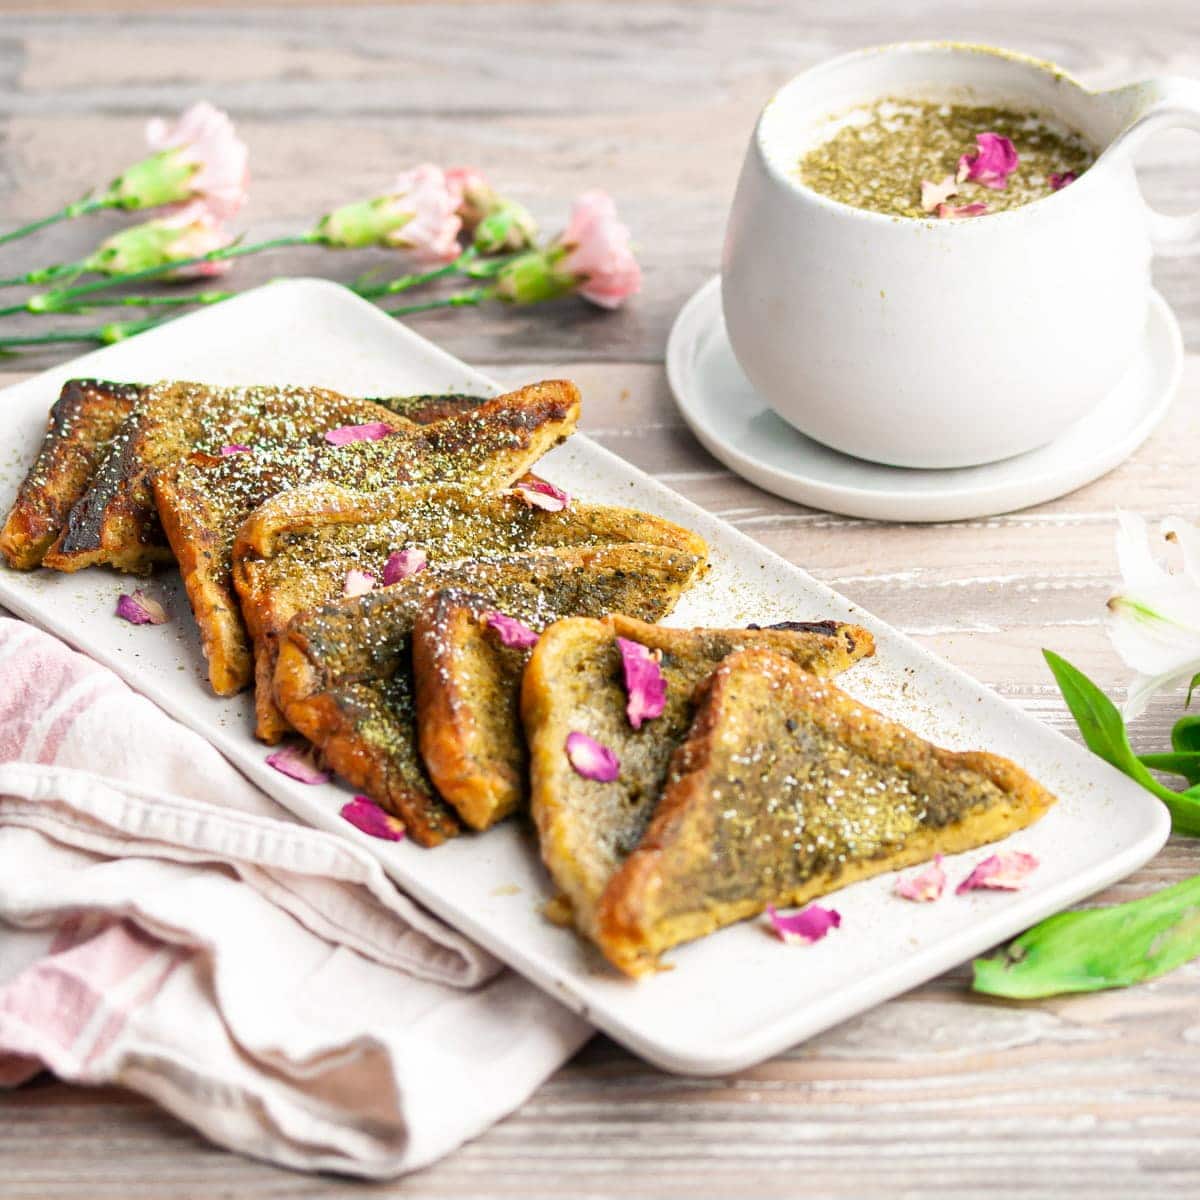 Platter of slices of matcha french toast garnished with edible rose petals